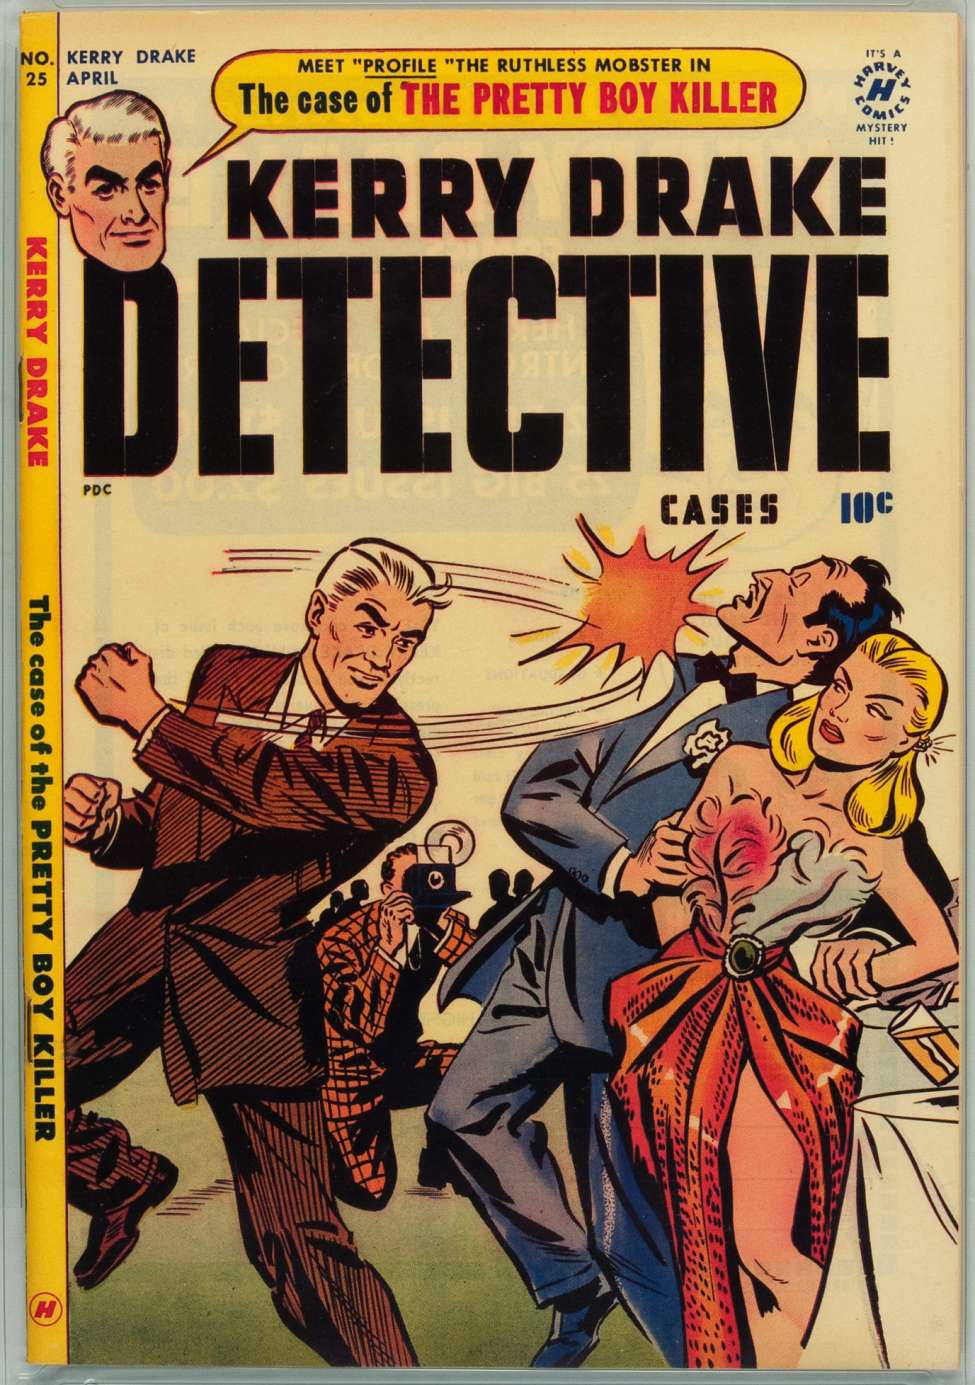 Book Cover For Kerry Drake Detective Cases 25